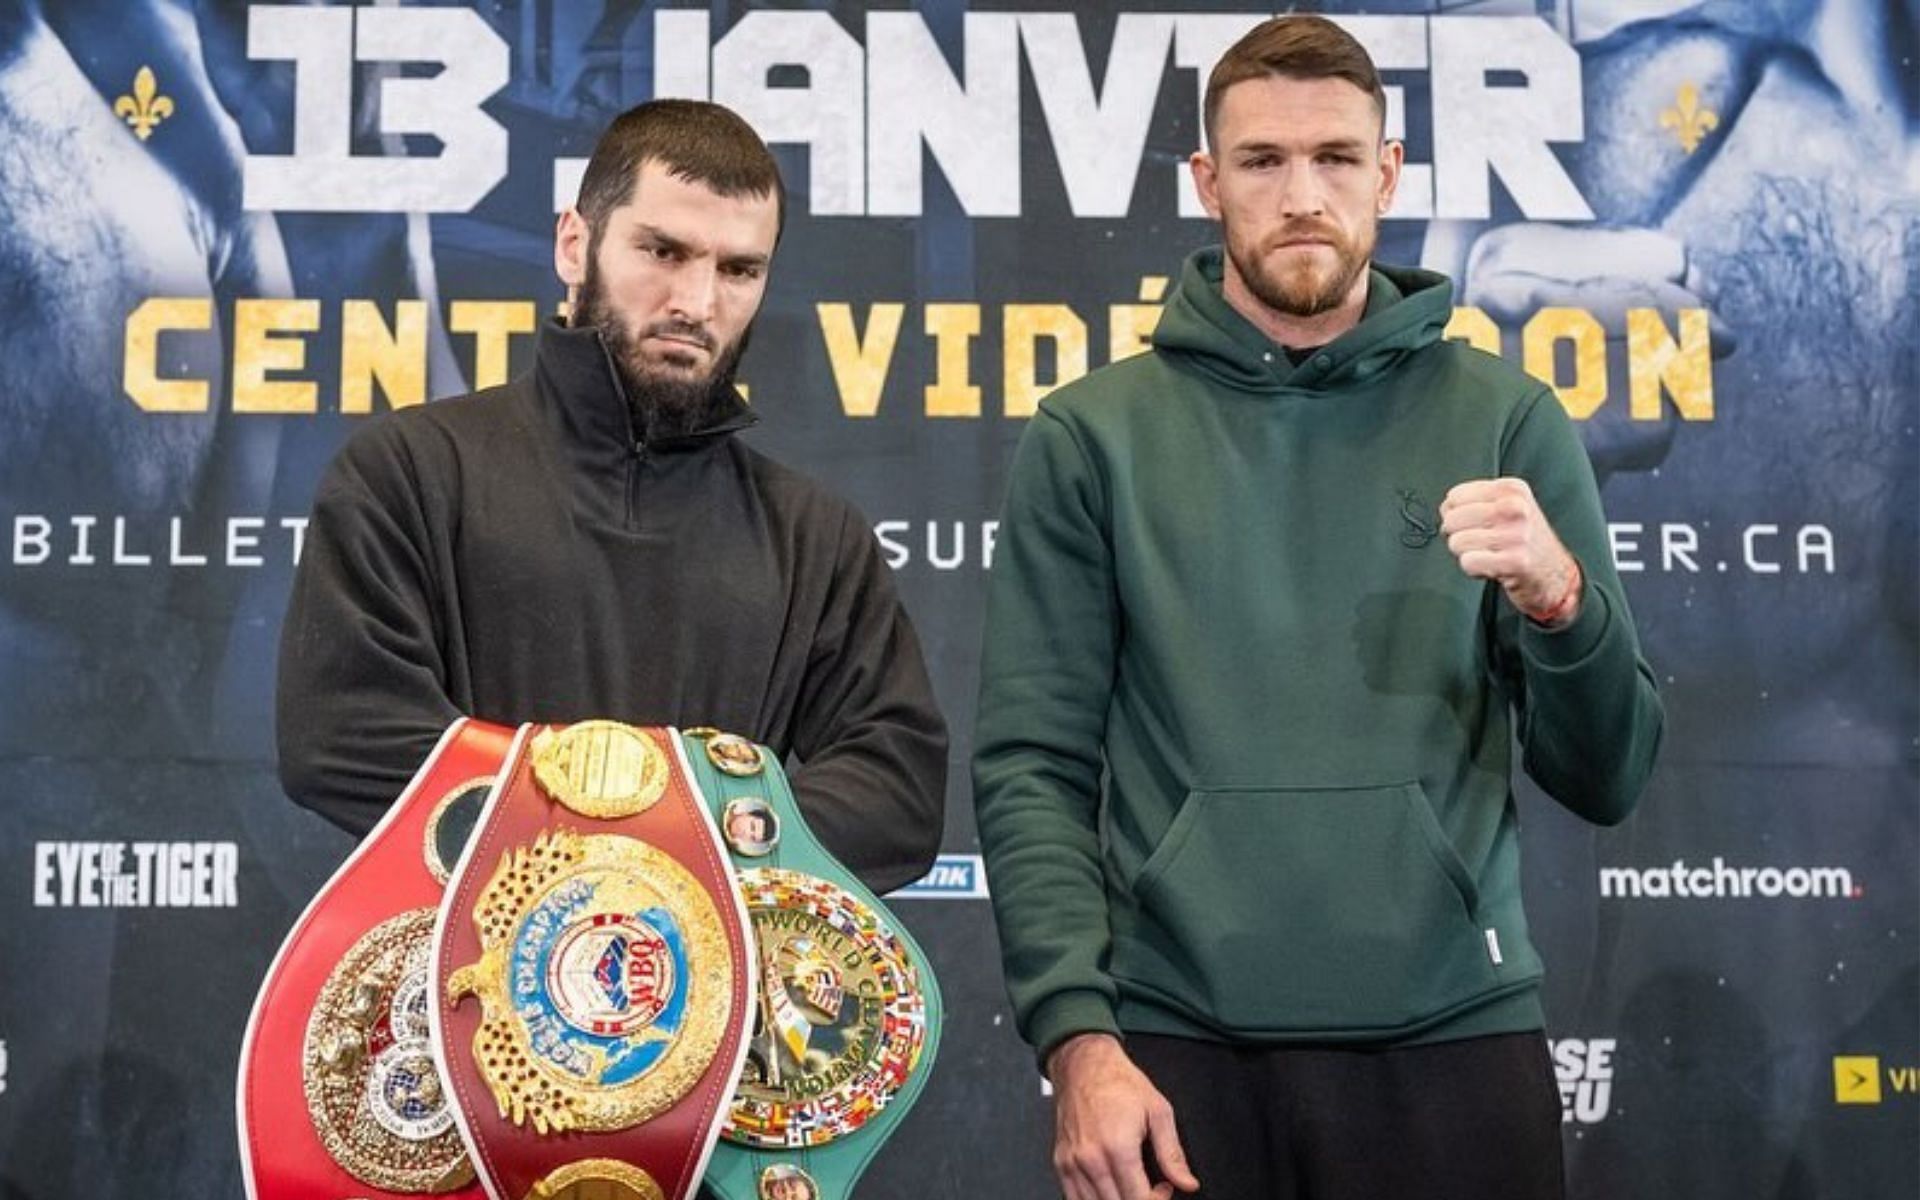 Artur Beterbiev (left) takes on Callum Smith (right) with the unified light heavyweight titles on the line [Image courtesy @arturbeterbiev on Instagram]